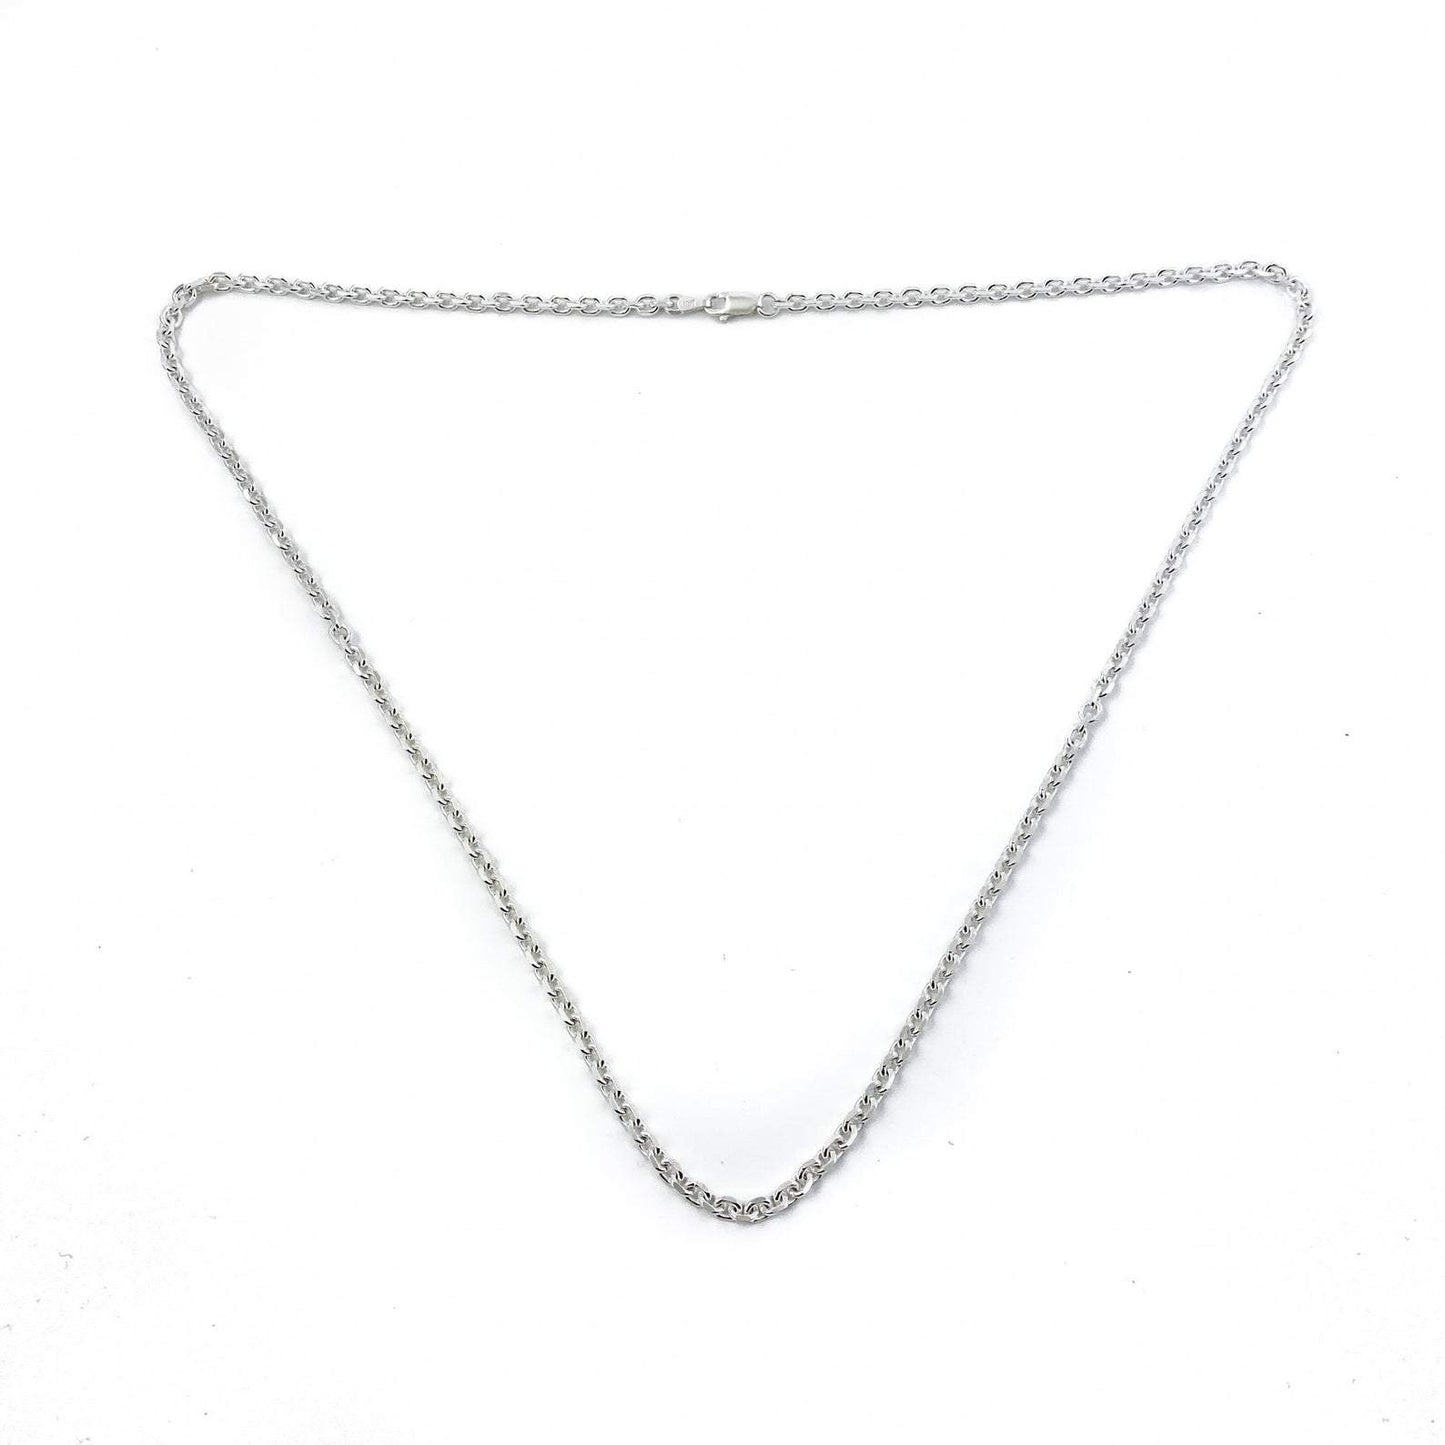 Solid Sterling Silver 3mm Trace Link Chain Necklace - Kingdom Jewelry